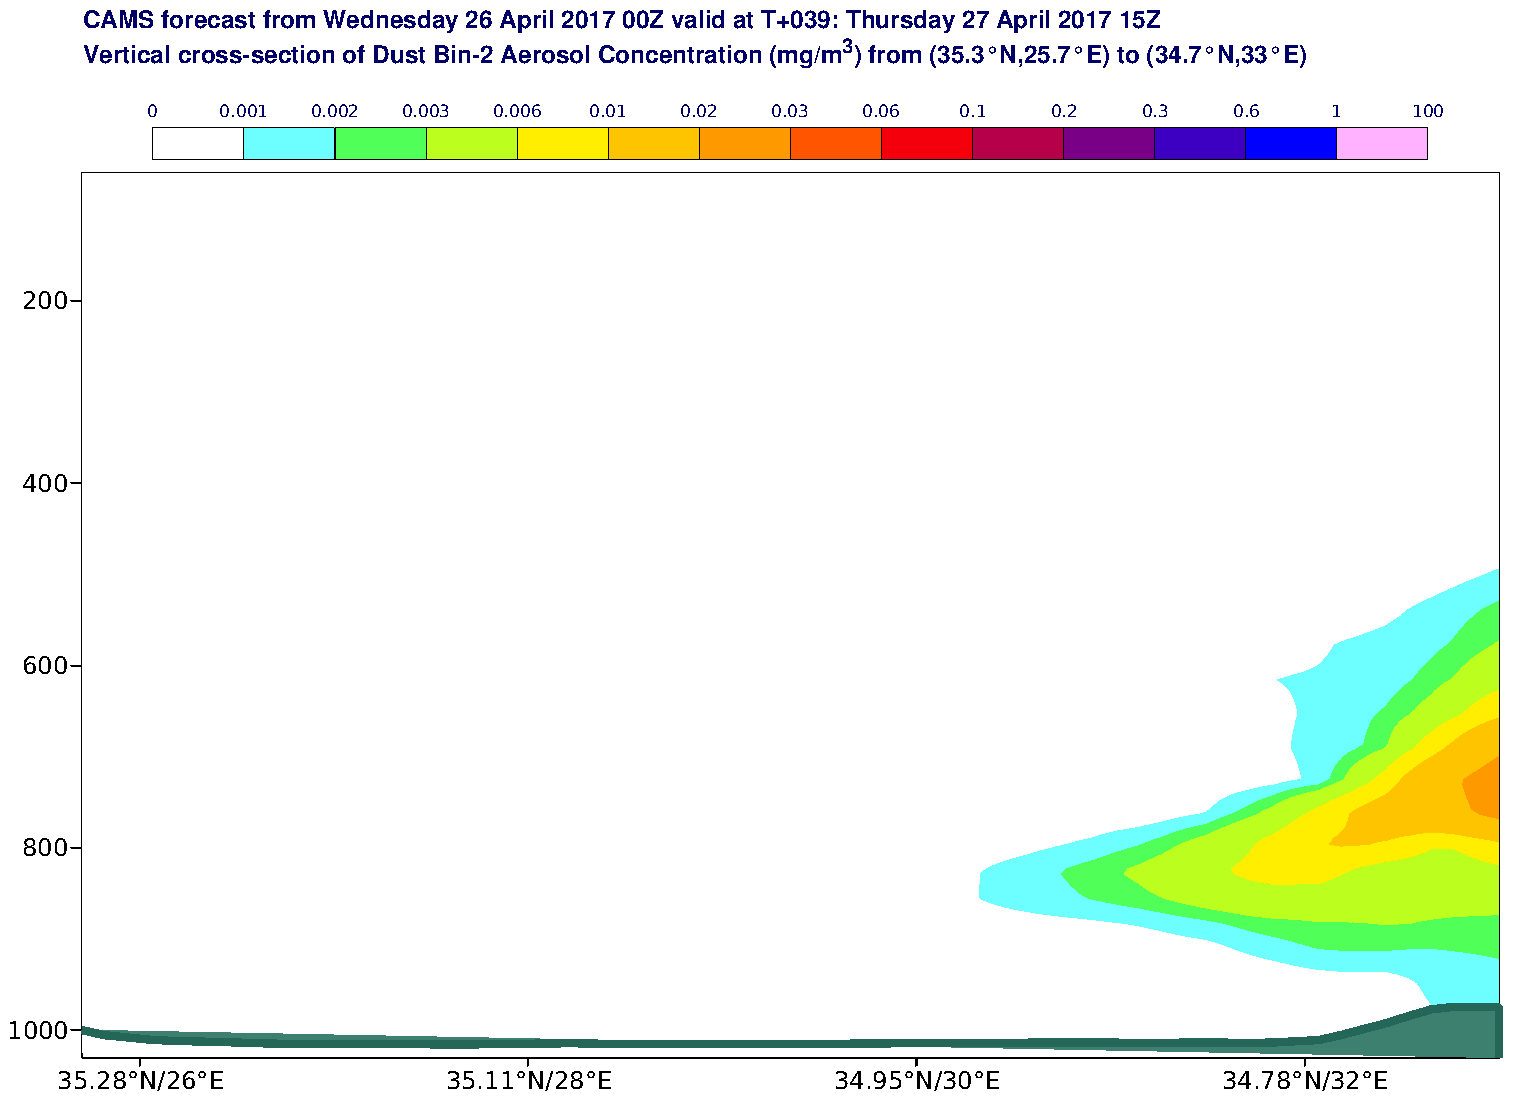 Vertical cross-section of Dust Bin-2 Aerosol Concentration (mg/m3) valid at T39 - 2017-04-27 15:00